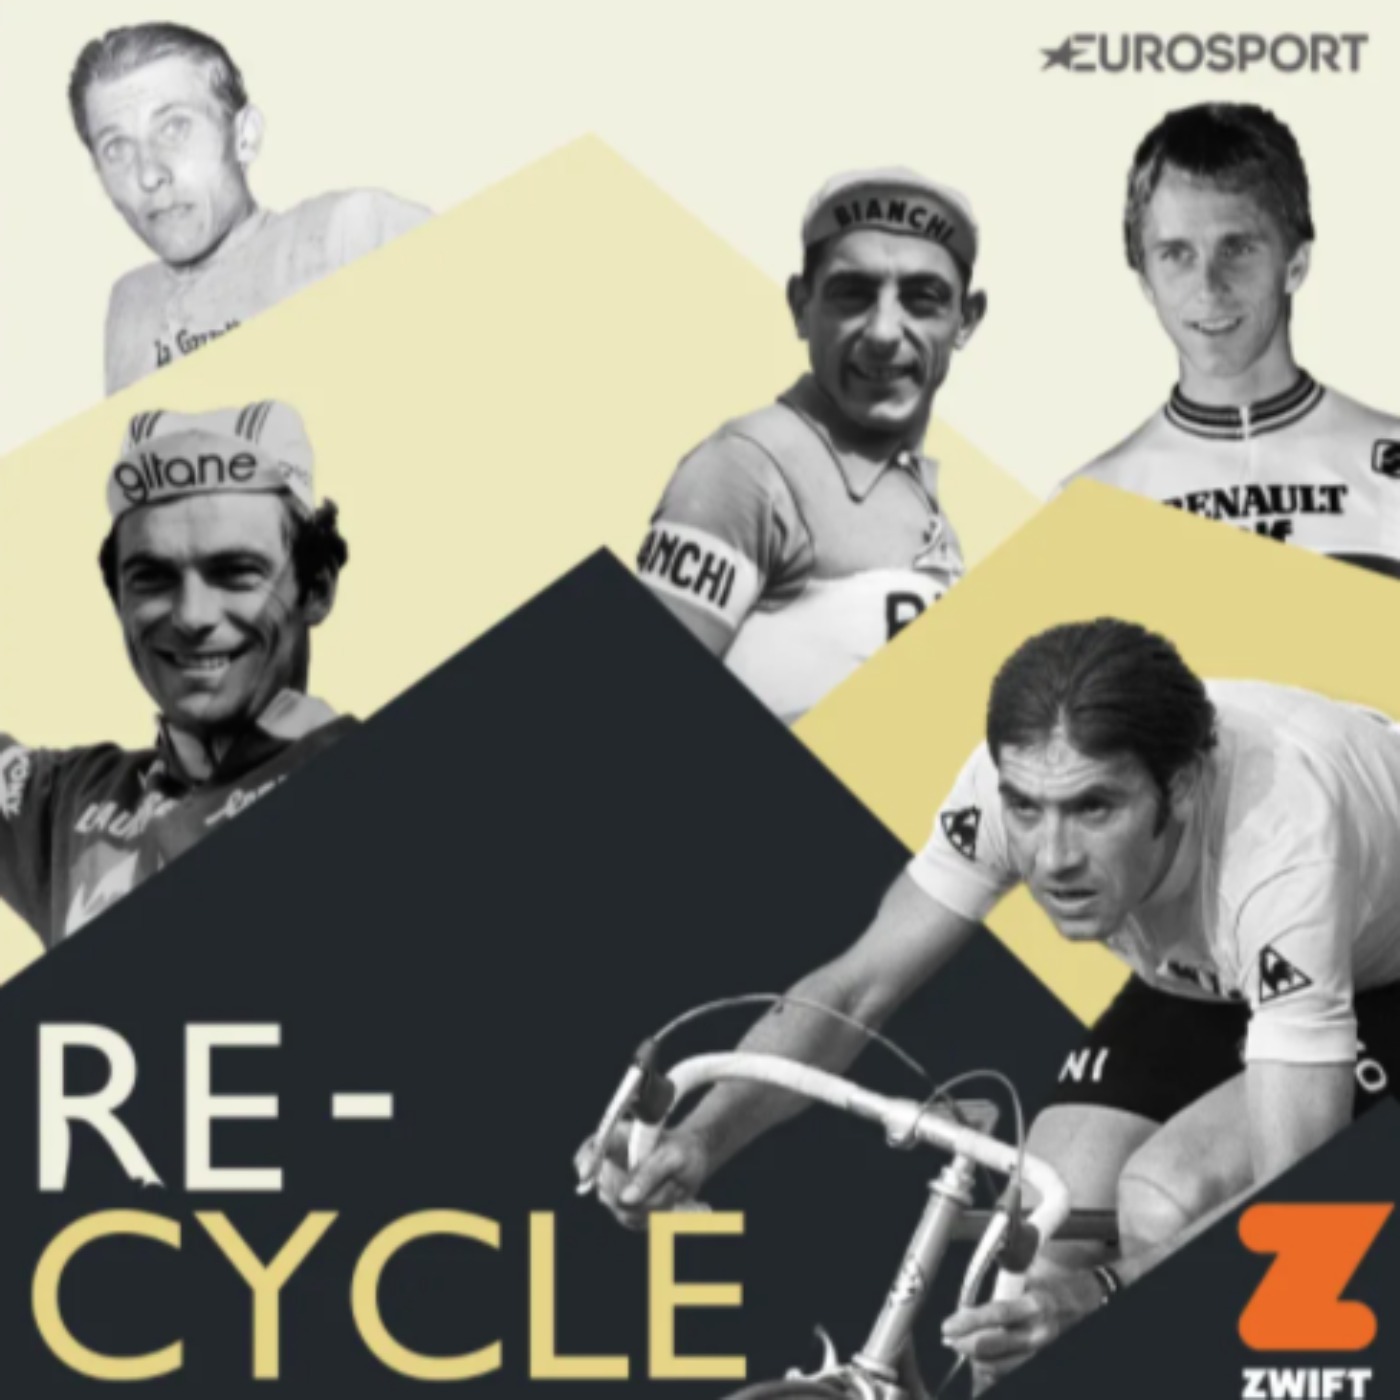 When Federico Bahamontes gifted the 1957 Vuelta to rival Jesus Lorono